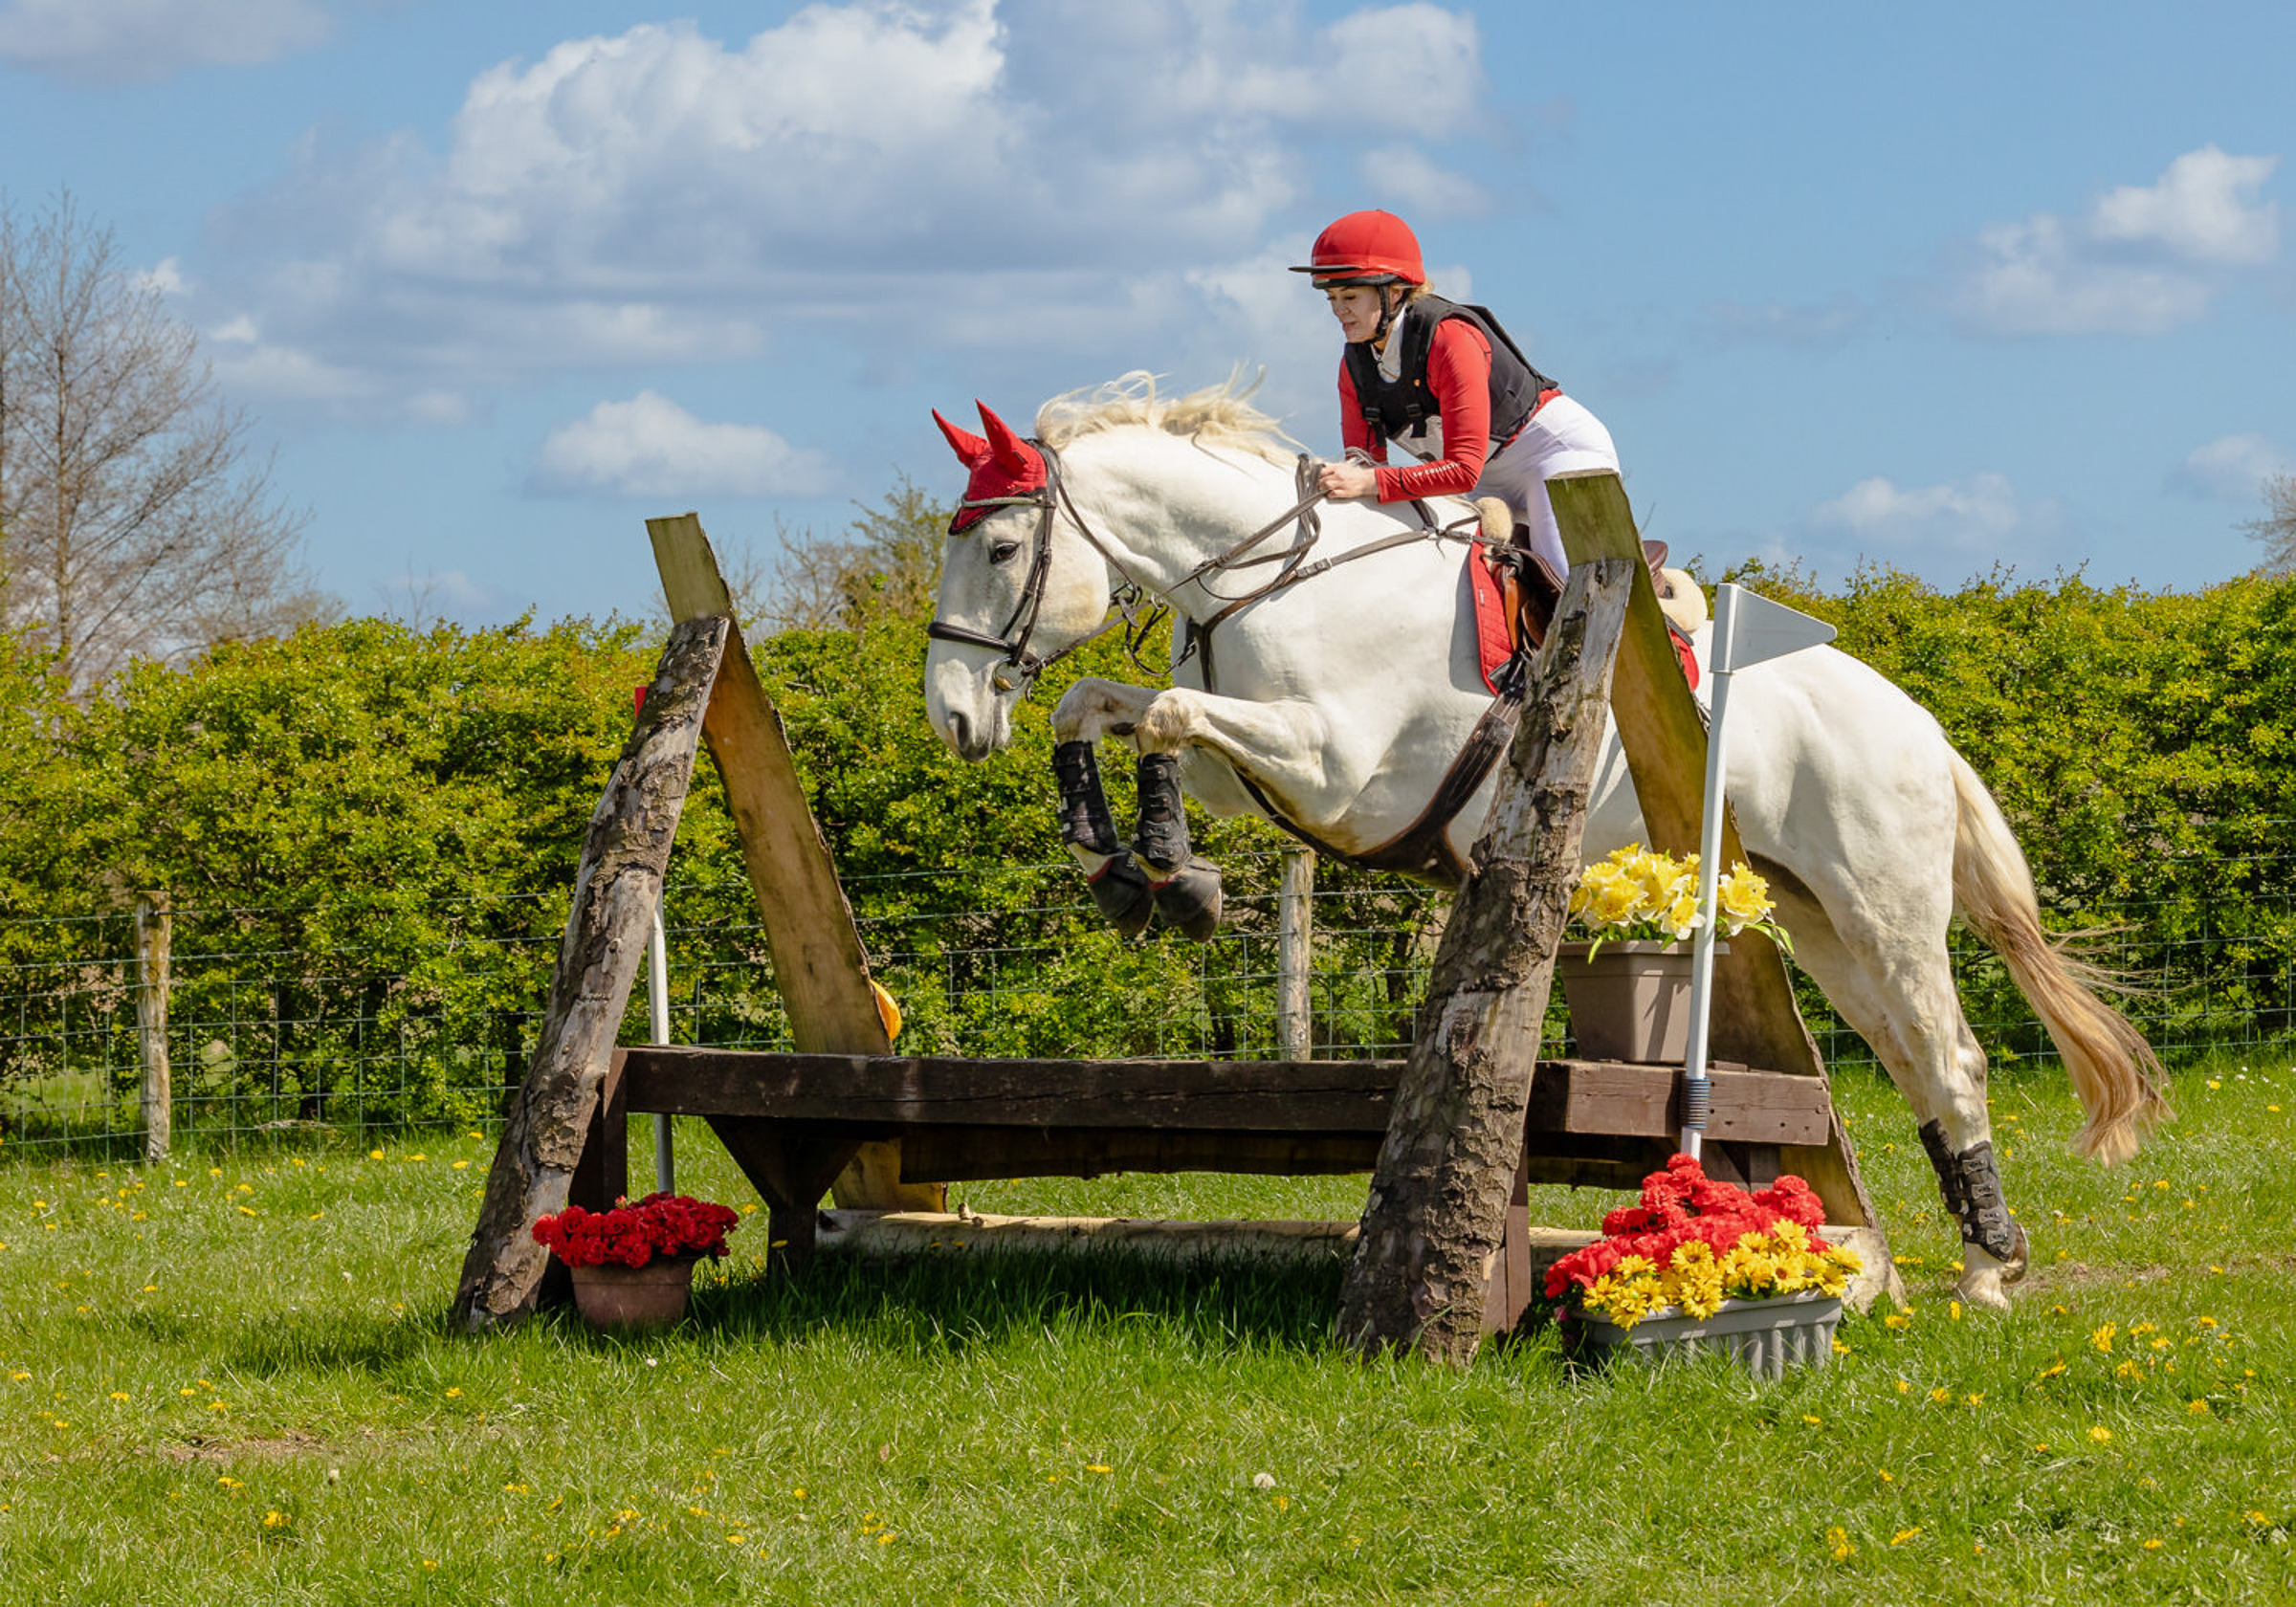 grey horse with rider wearing red jumping a cross country fence